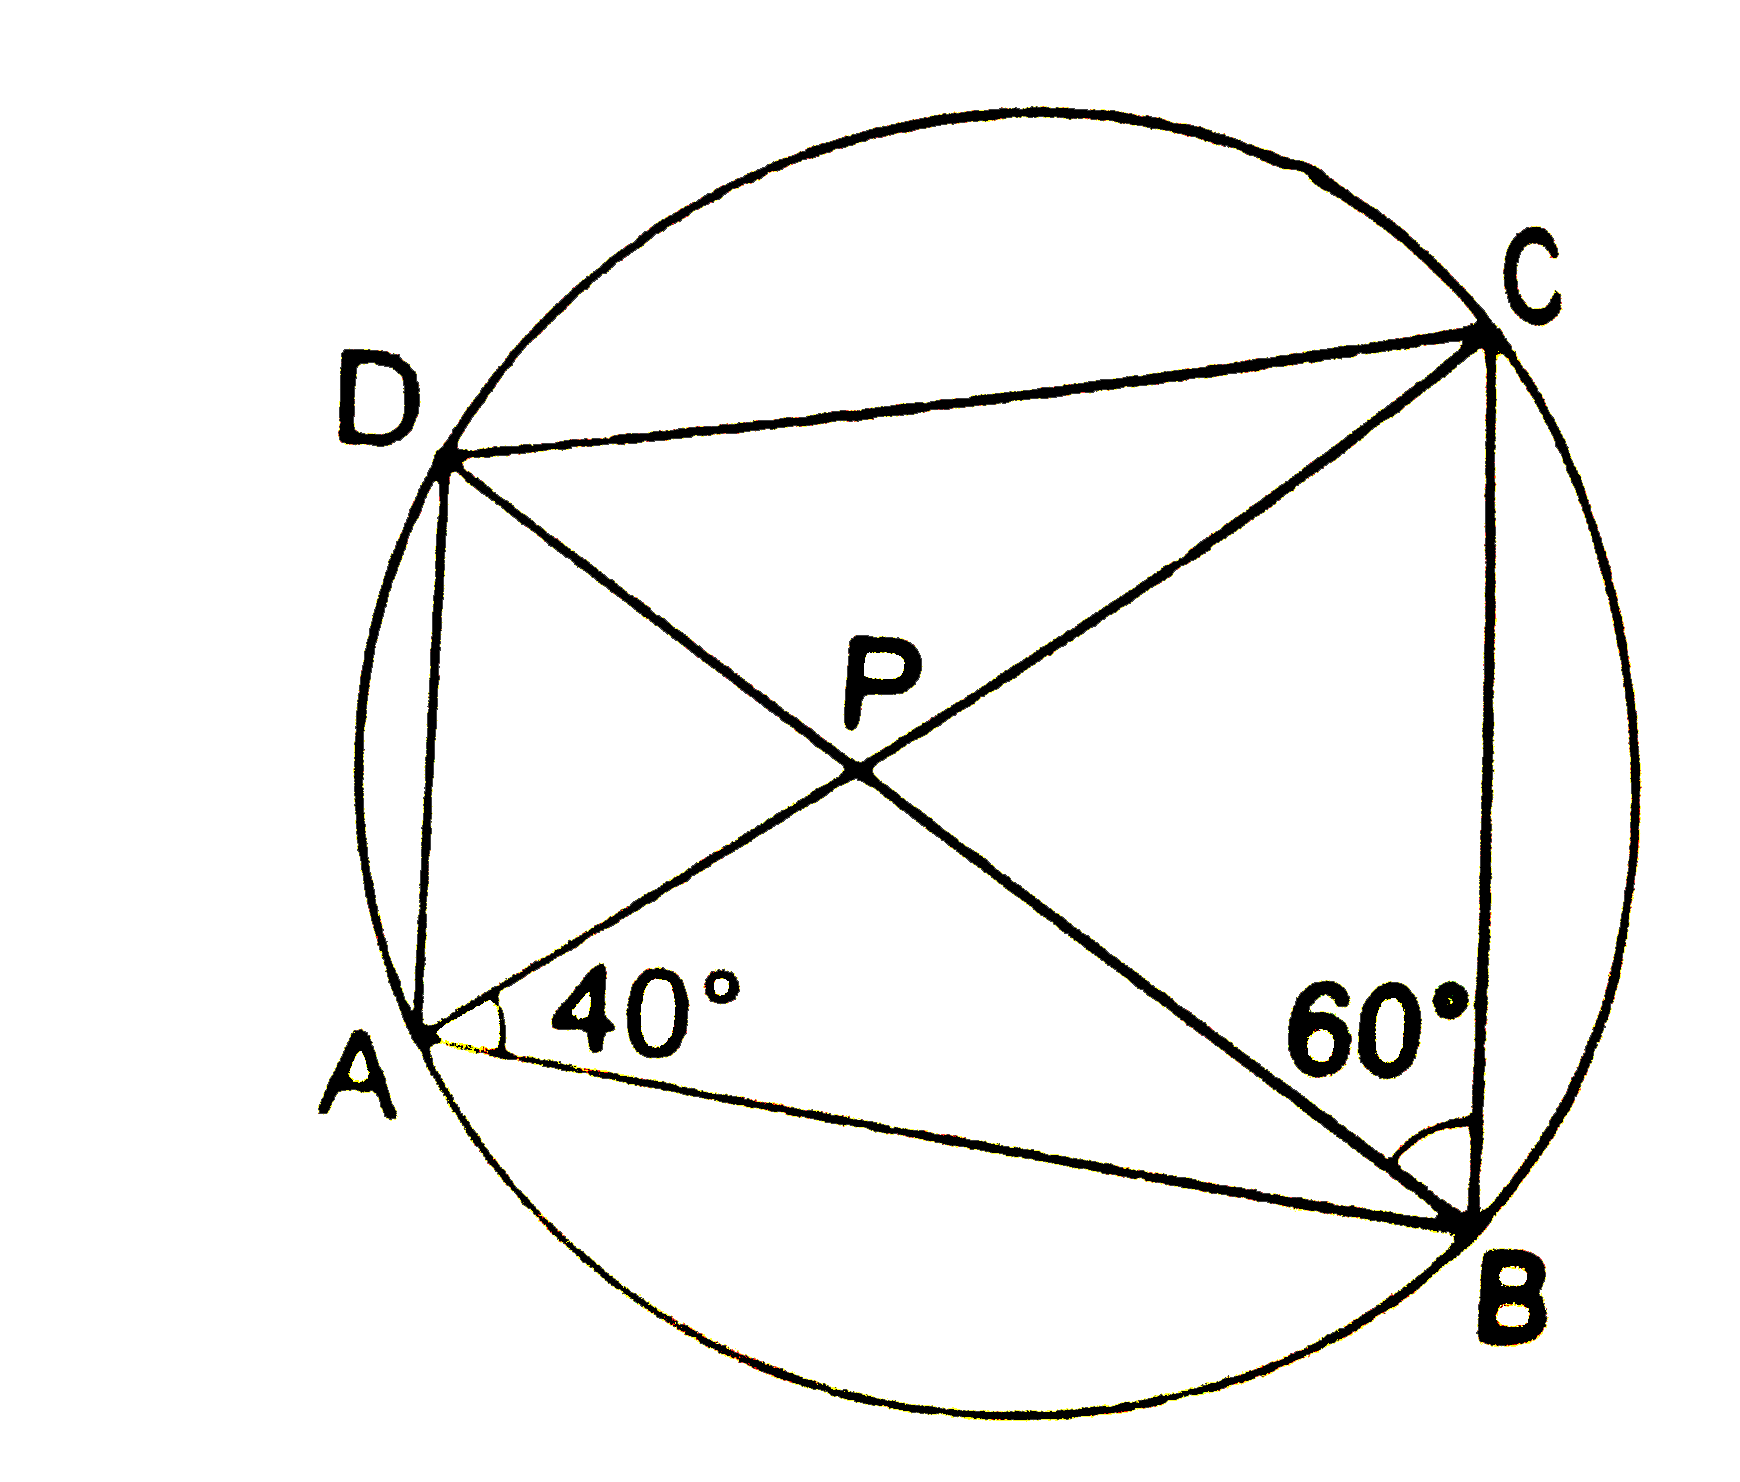 In the given figure, ABCD is a cyclic quadrilateral whose diagonals intersect at P such that / DBC = 60^(@) and / BAC = 40^(@)   Find (i) / BCD , (ii) / CAD